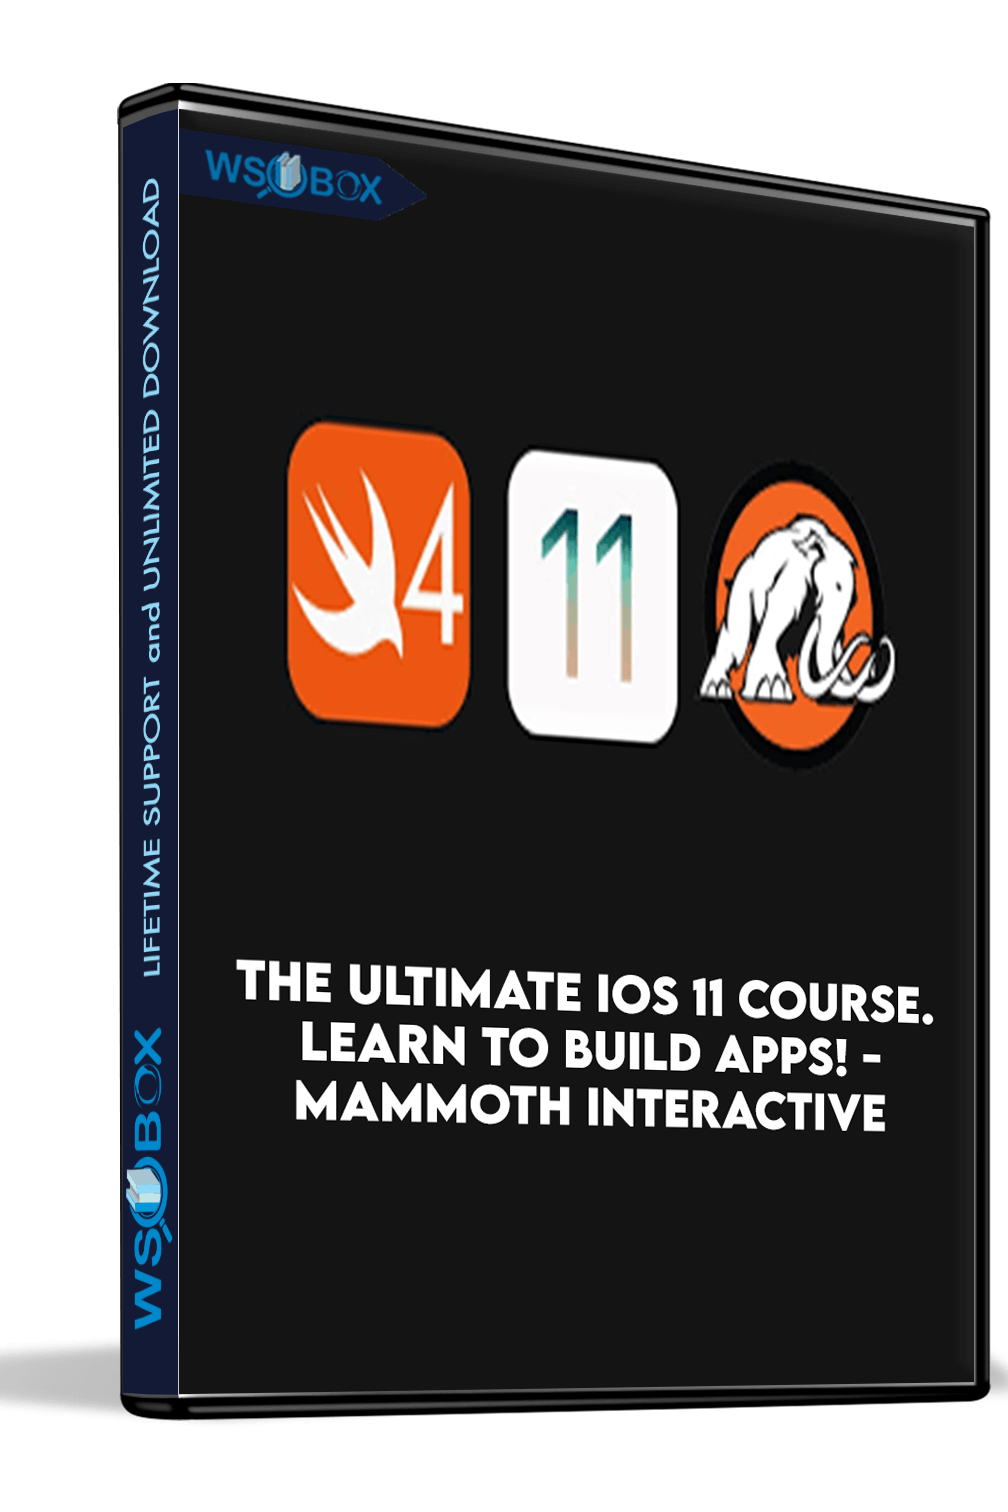 The Ultimate iOS 11 Course. Learn to Build Apps! – Mammoth Interactive